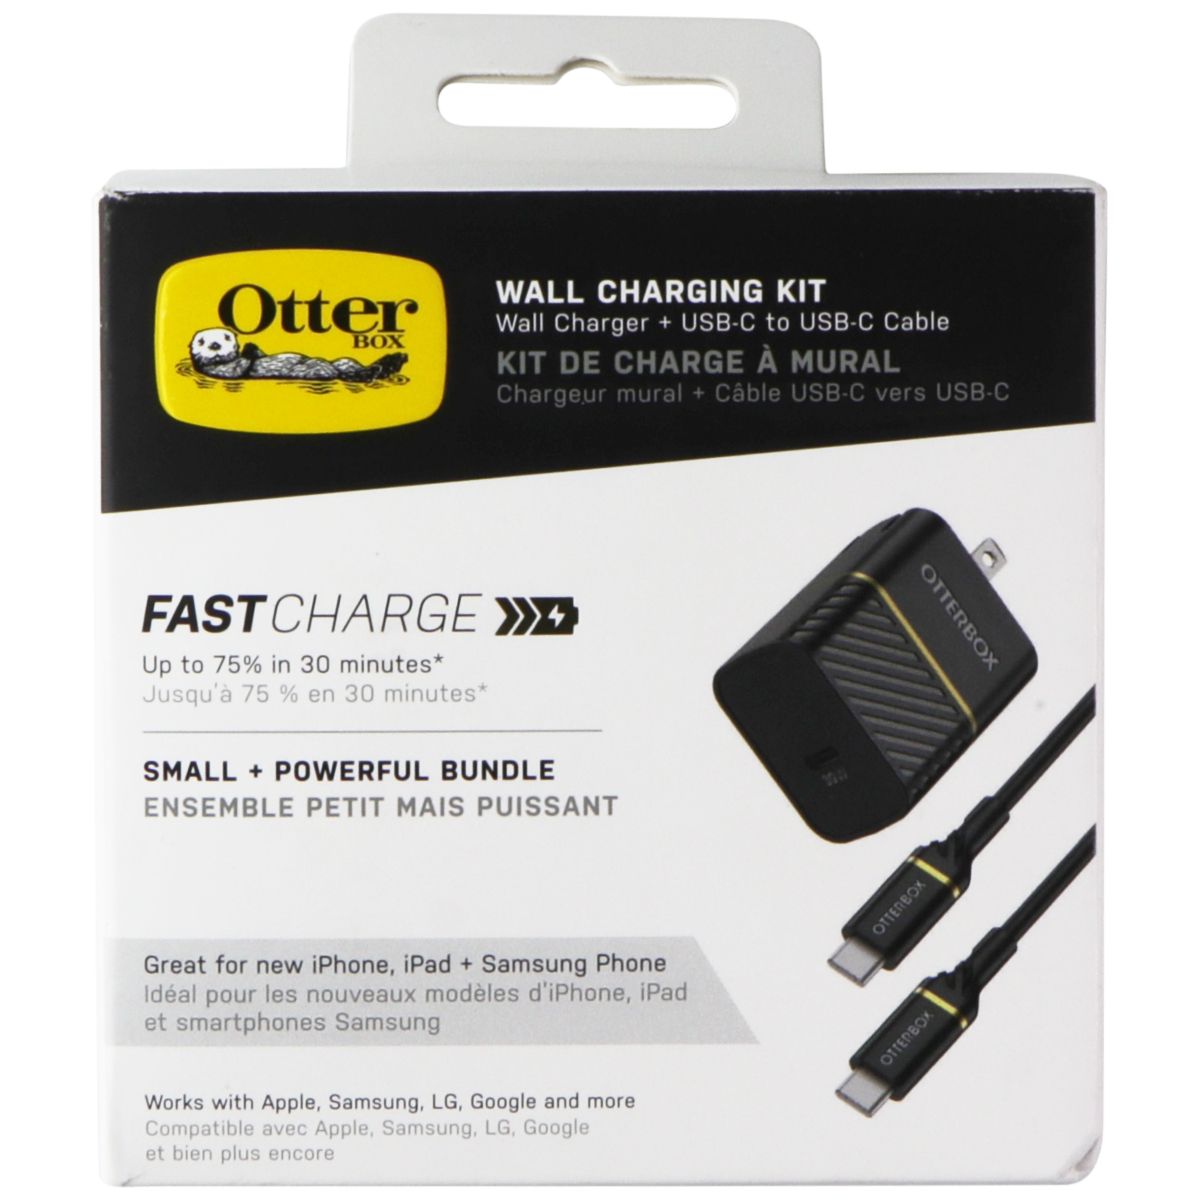 OtterBox Wall Charging Kit with 30W USB-C Adapter and 3.3-Ft USB-C Cable - Black